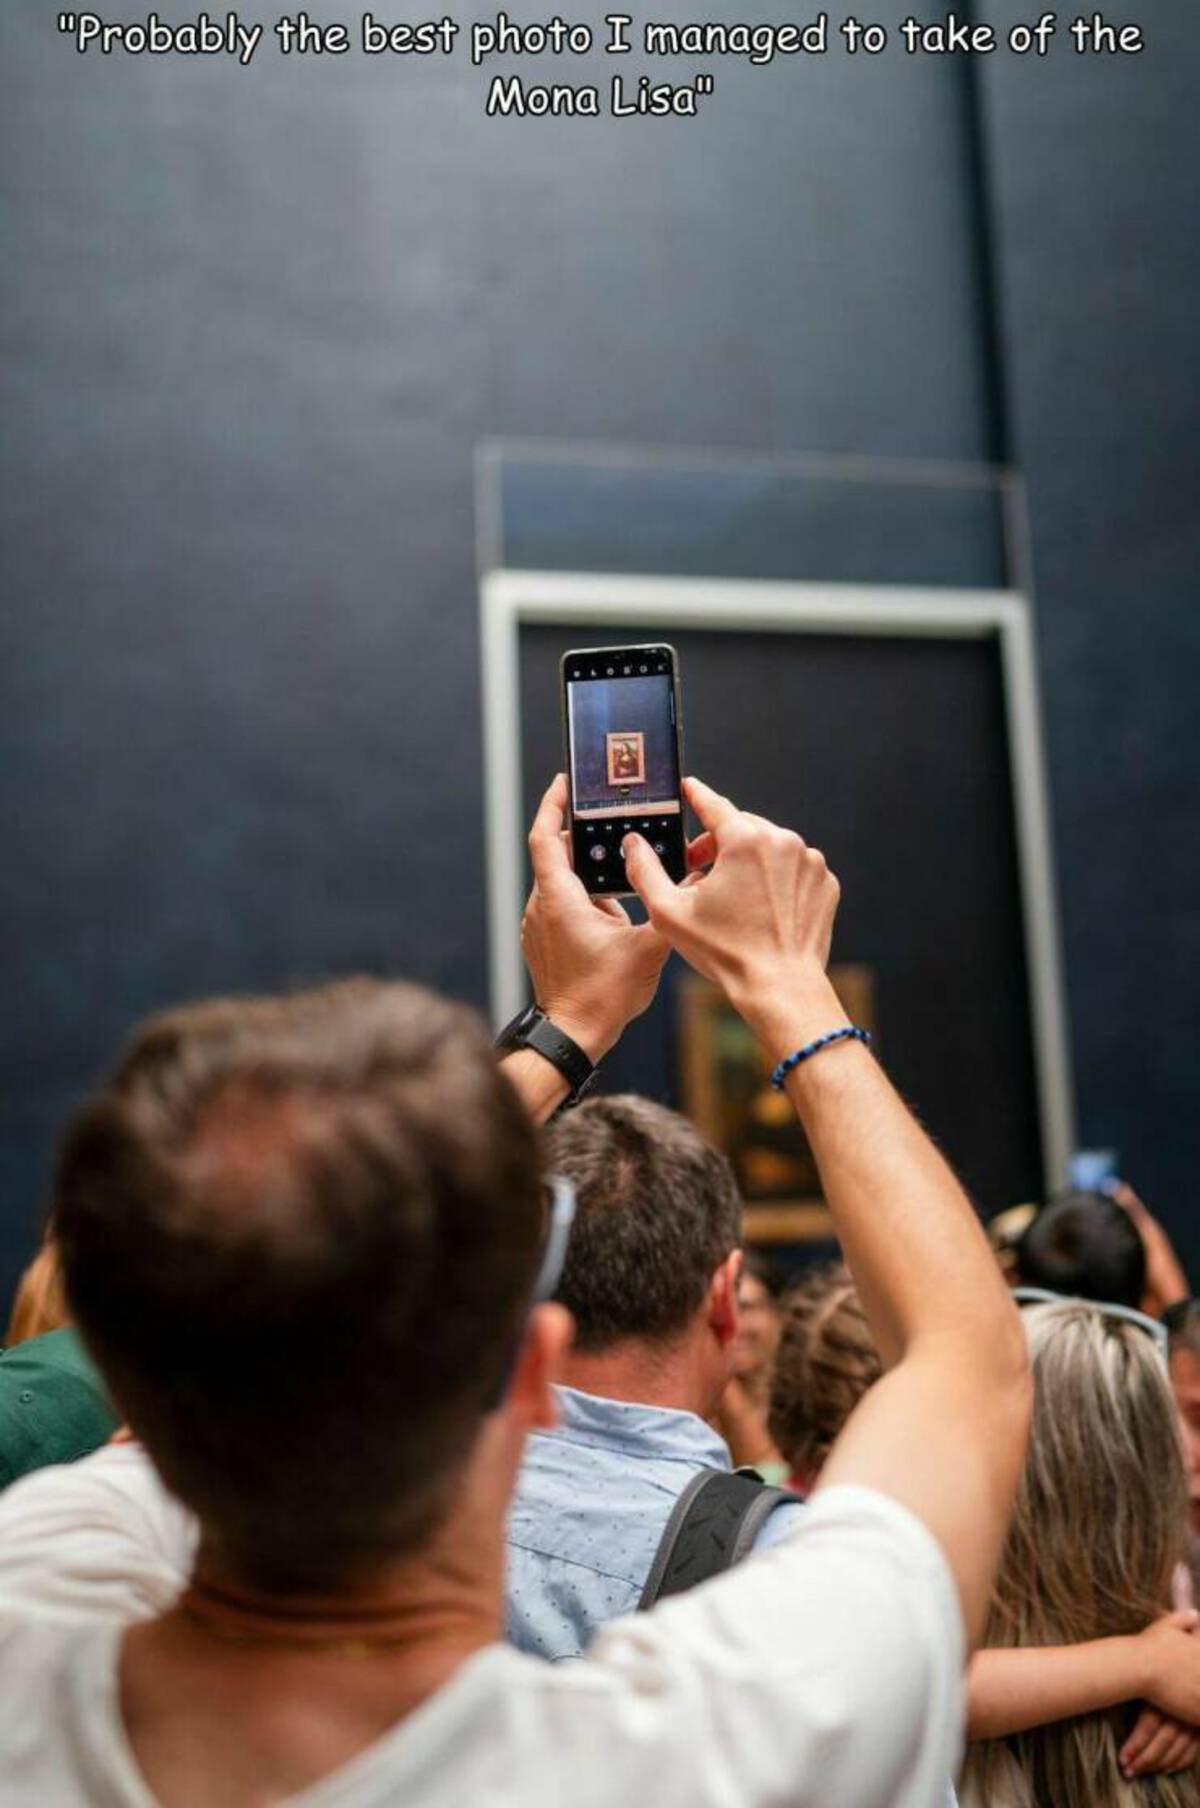 gadget - "Probably the best photo I managed to take of the Mona Lisa"